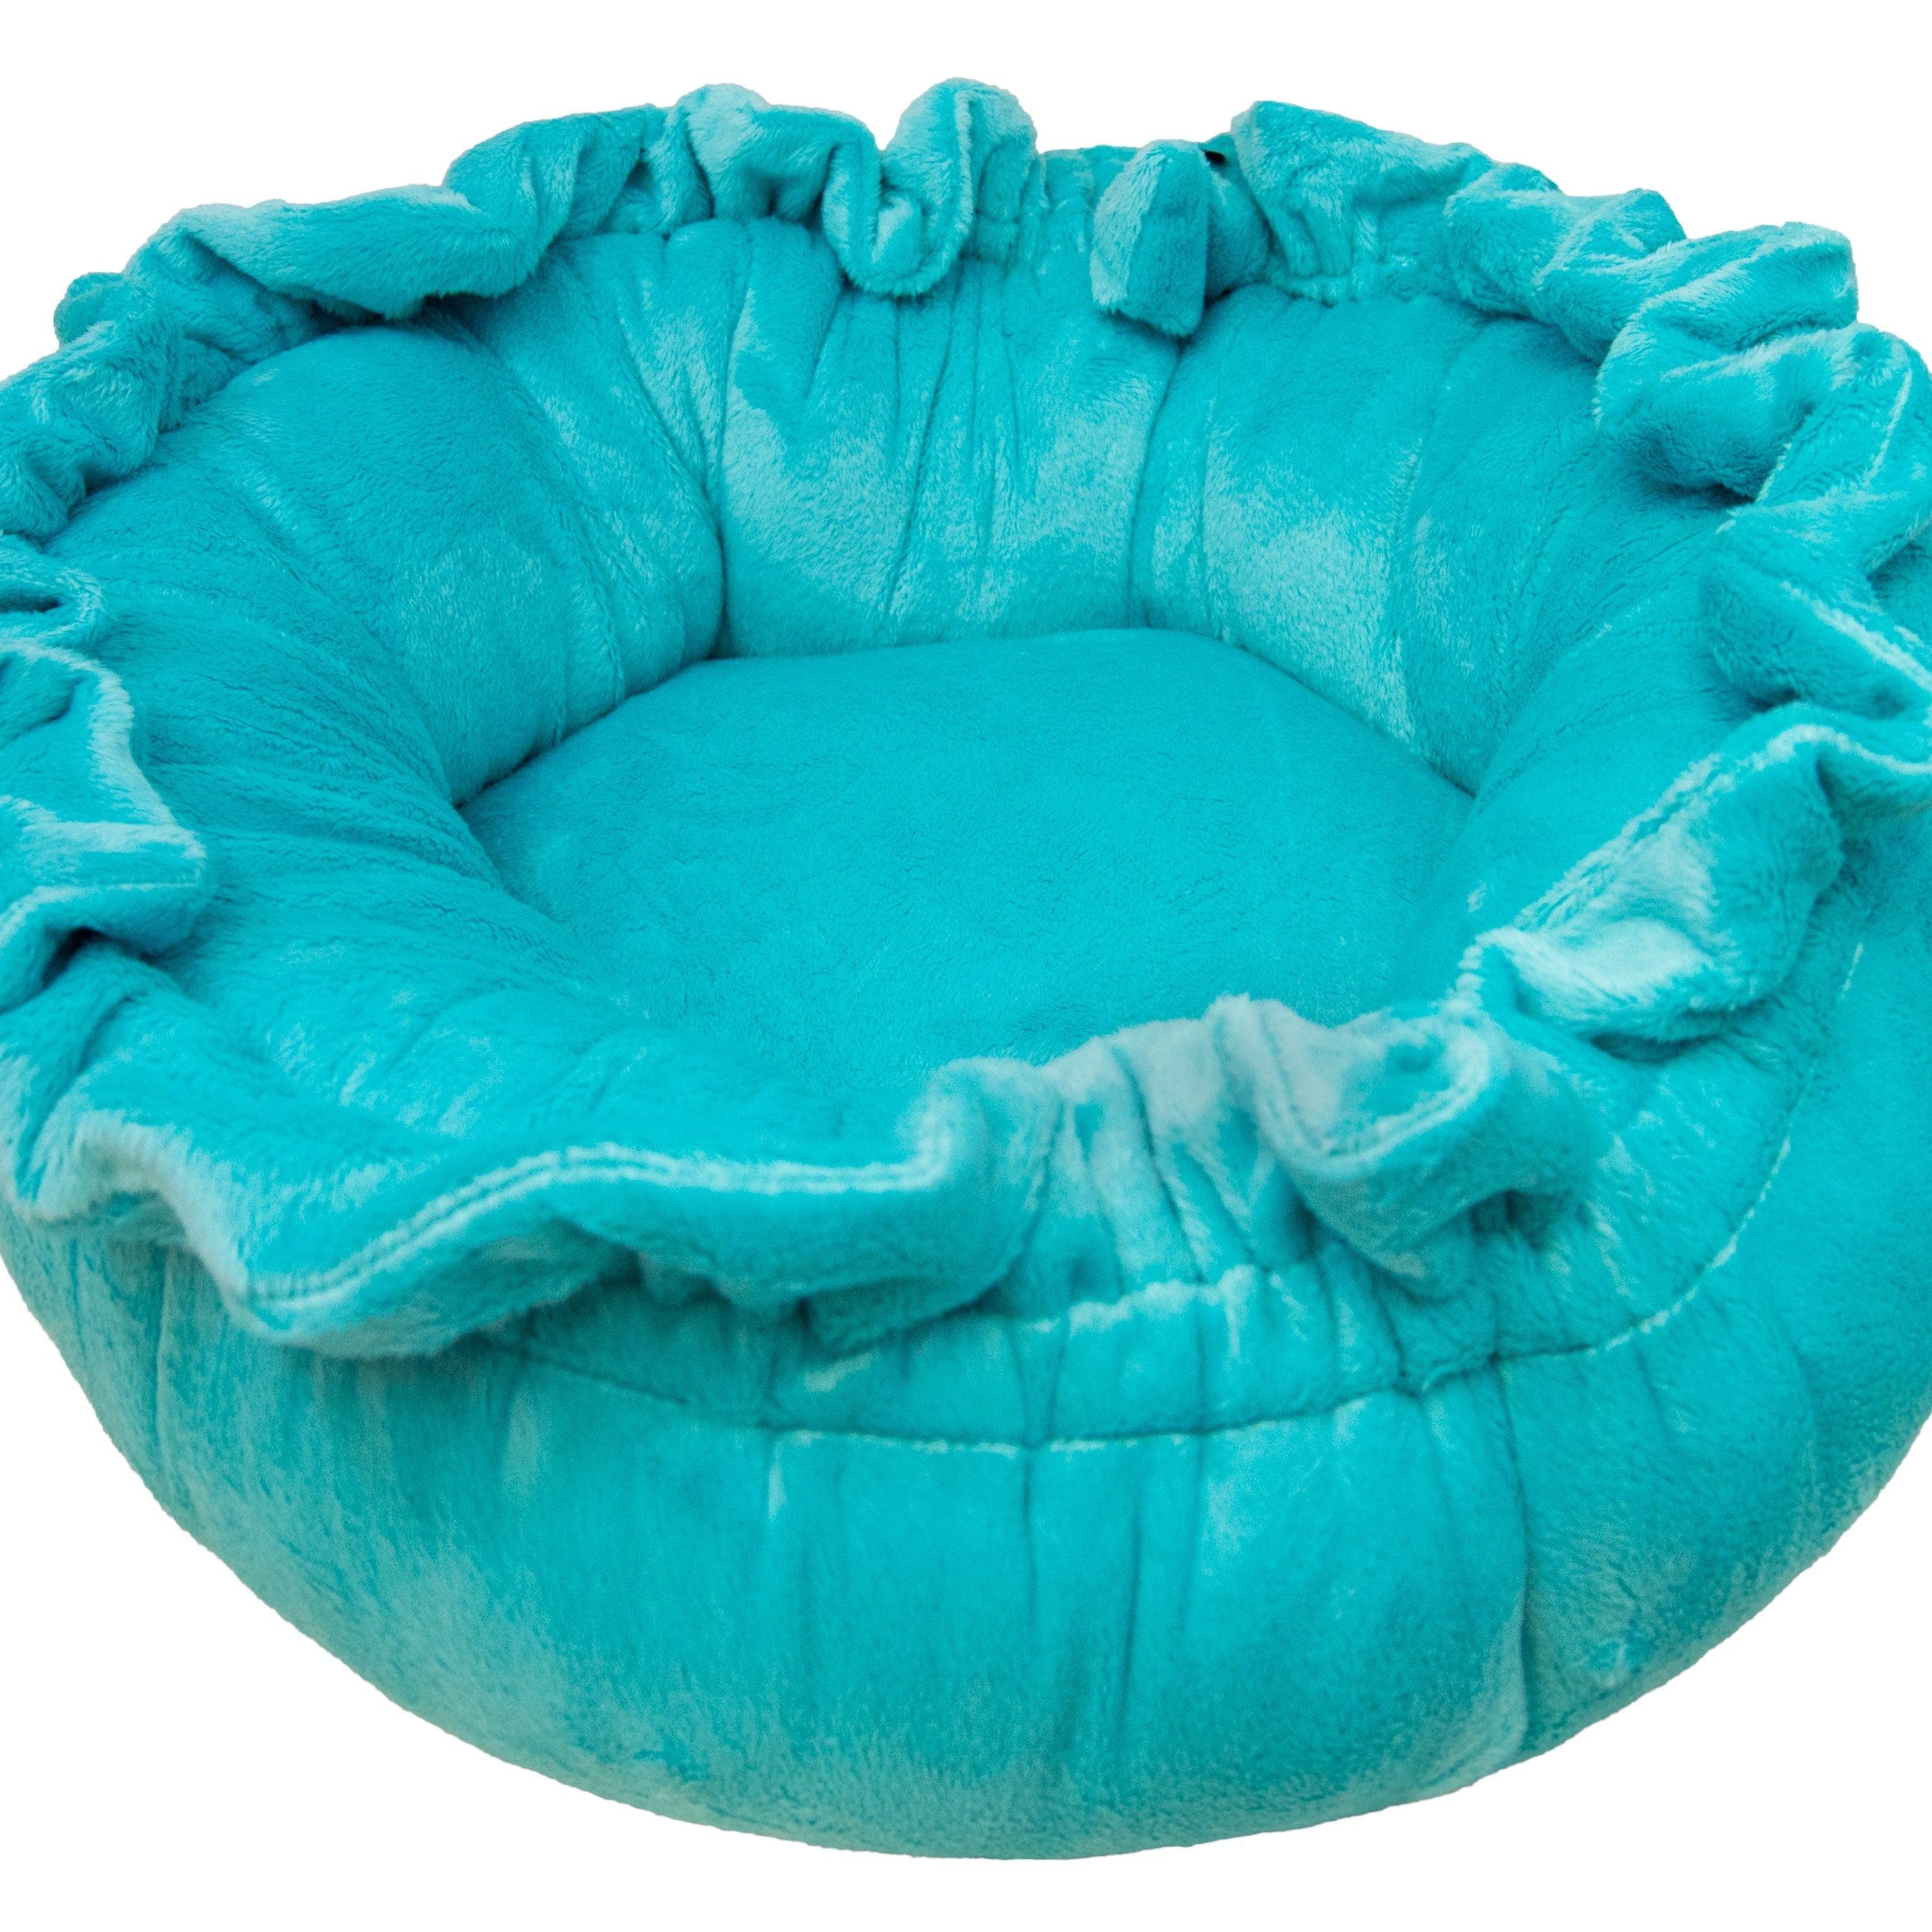 Lily Pod - Aqua Marine and Snow White Patch - Rocky & Maggie's Pet Boutique and Salon